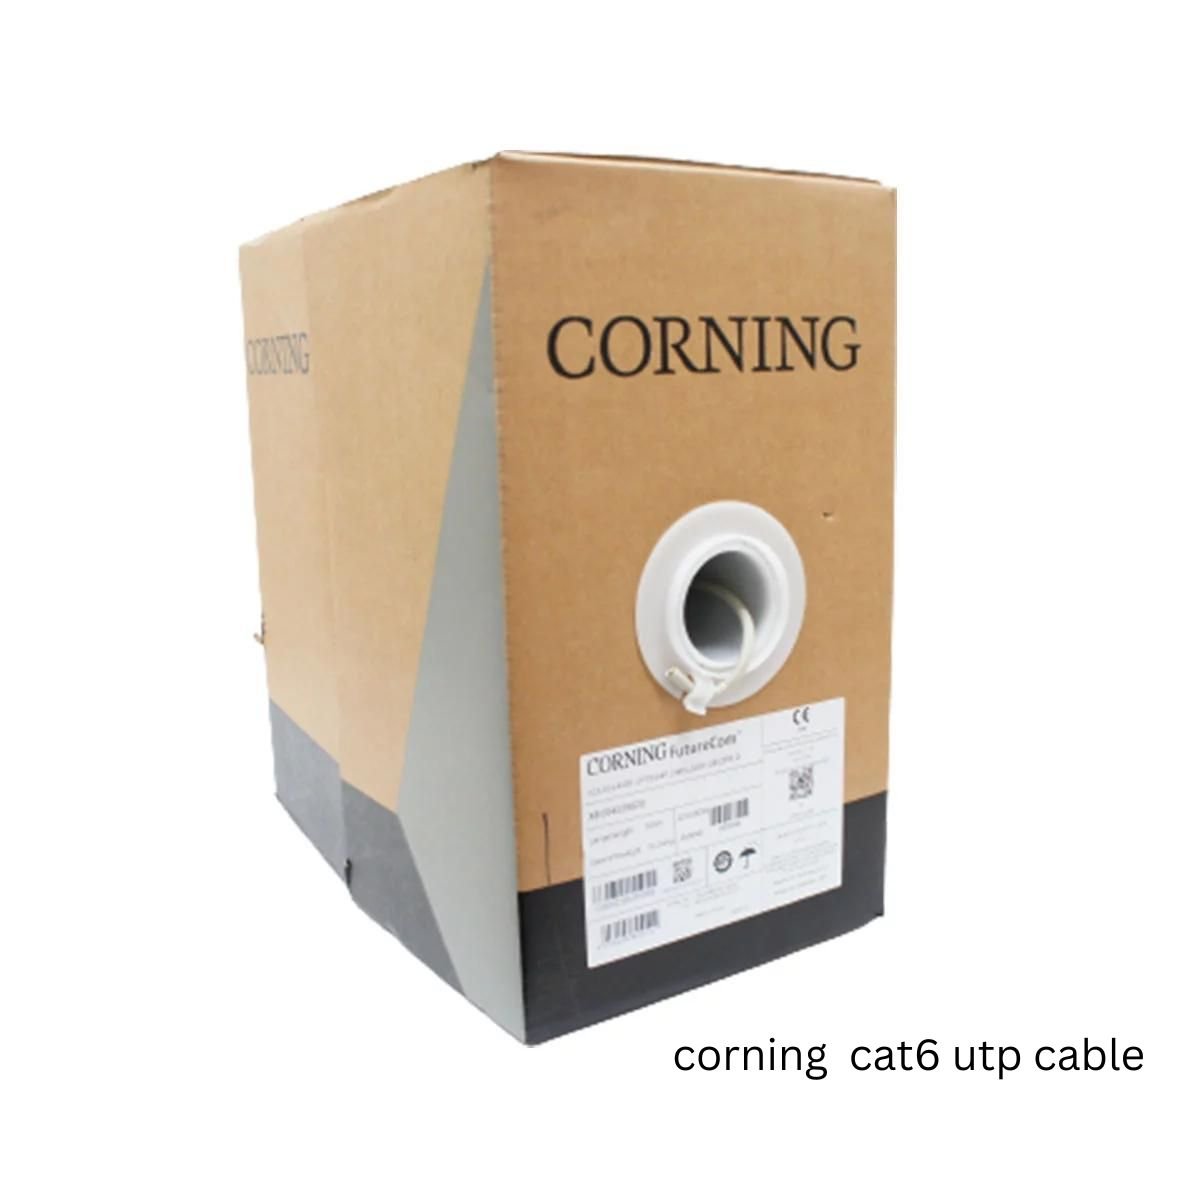 Top Corning Cable Supplier in UAE | Fiber Link Computer Trading LLC